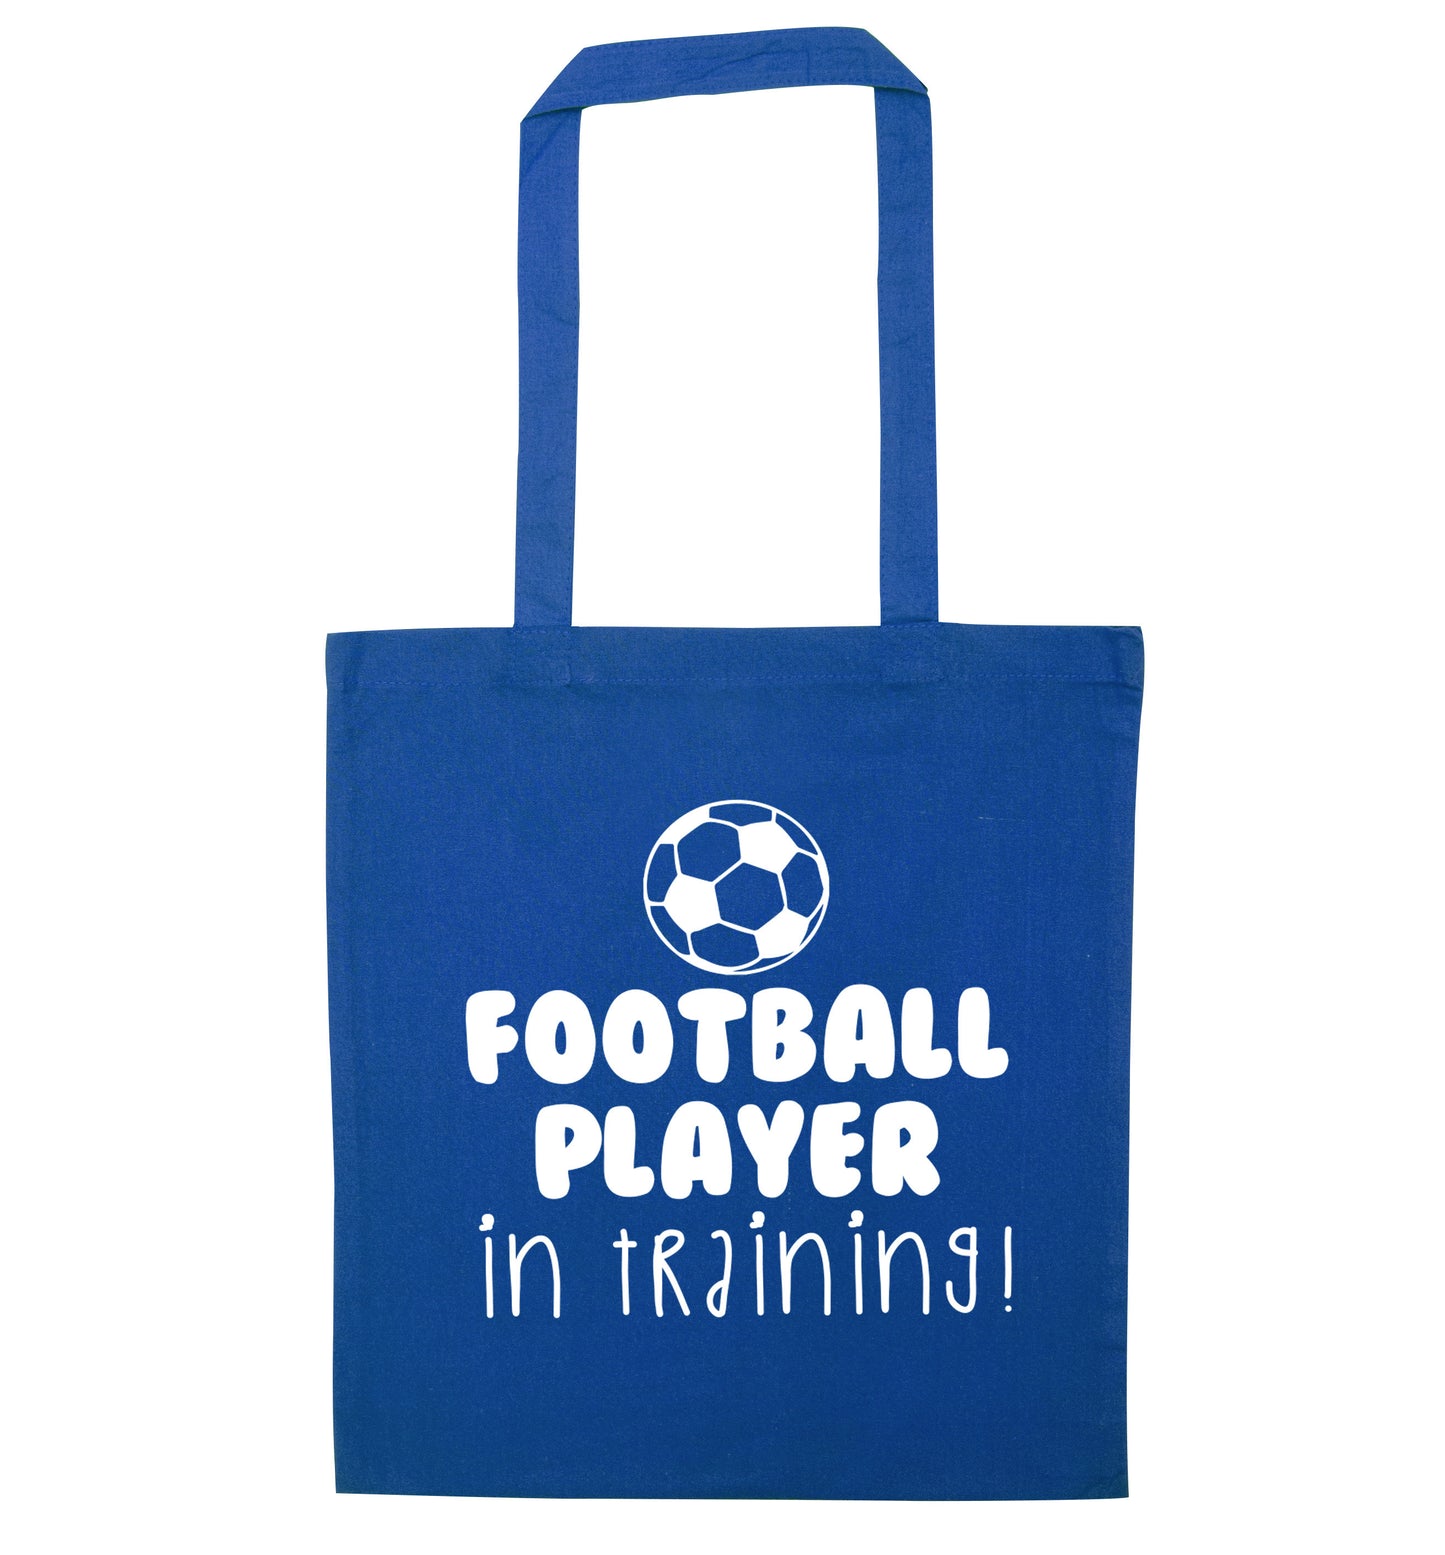 Football player in training blue tote bag